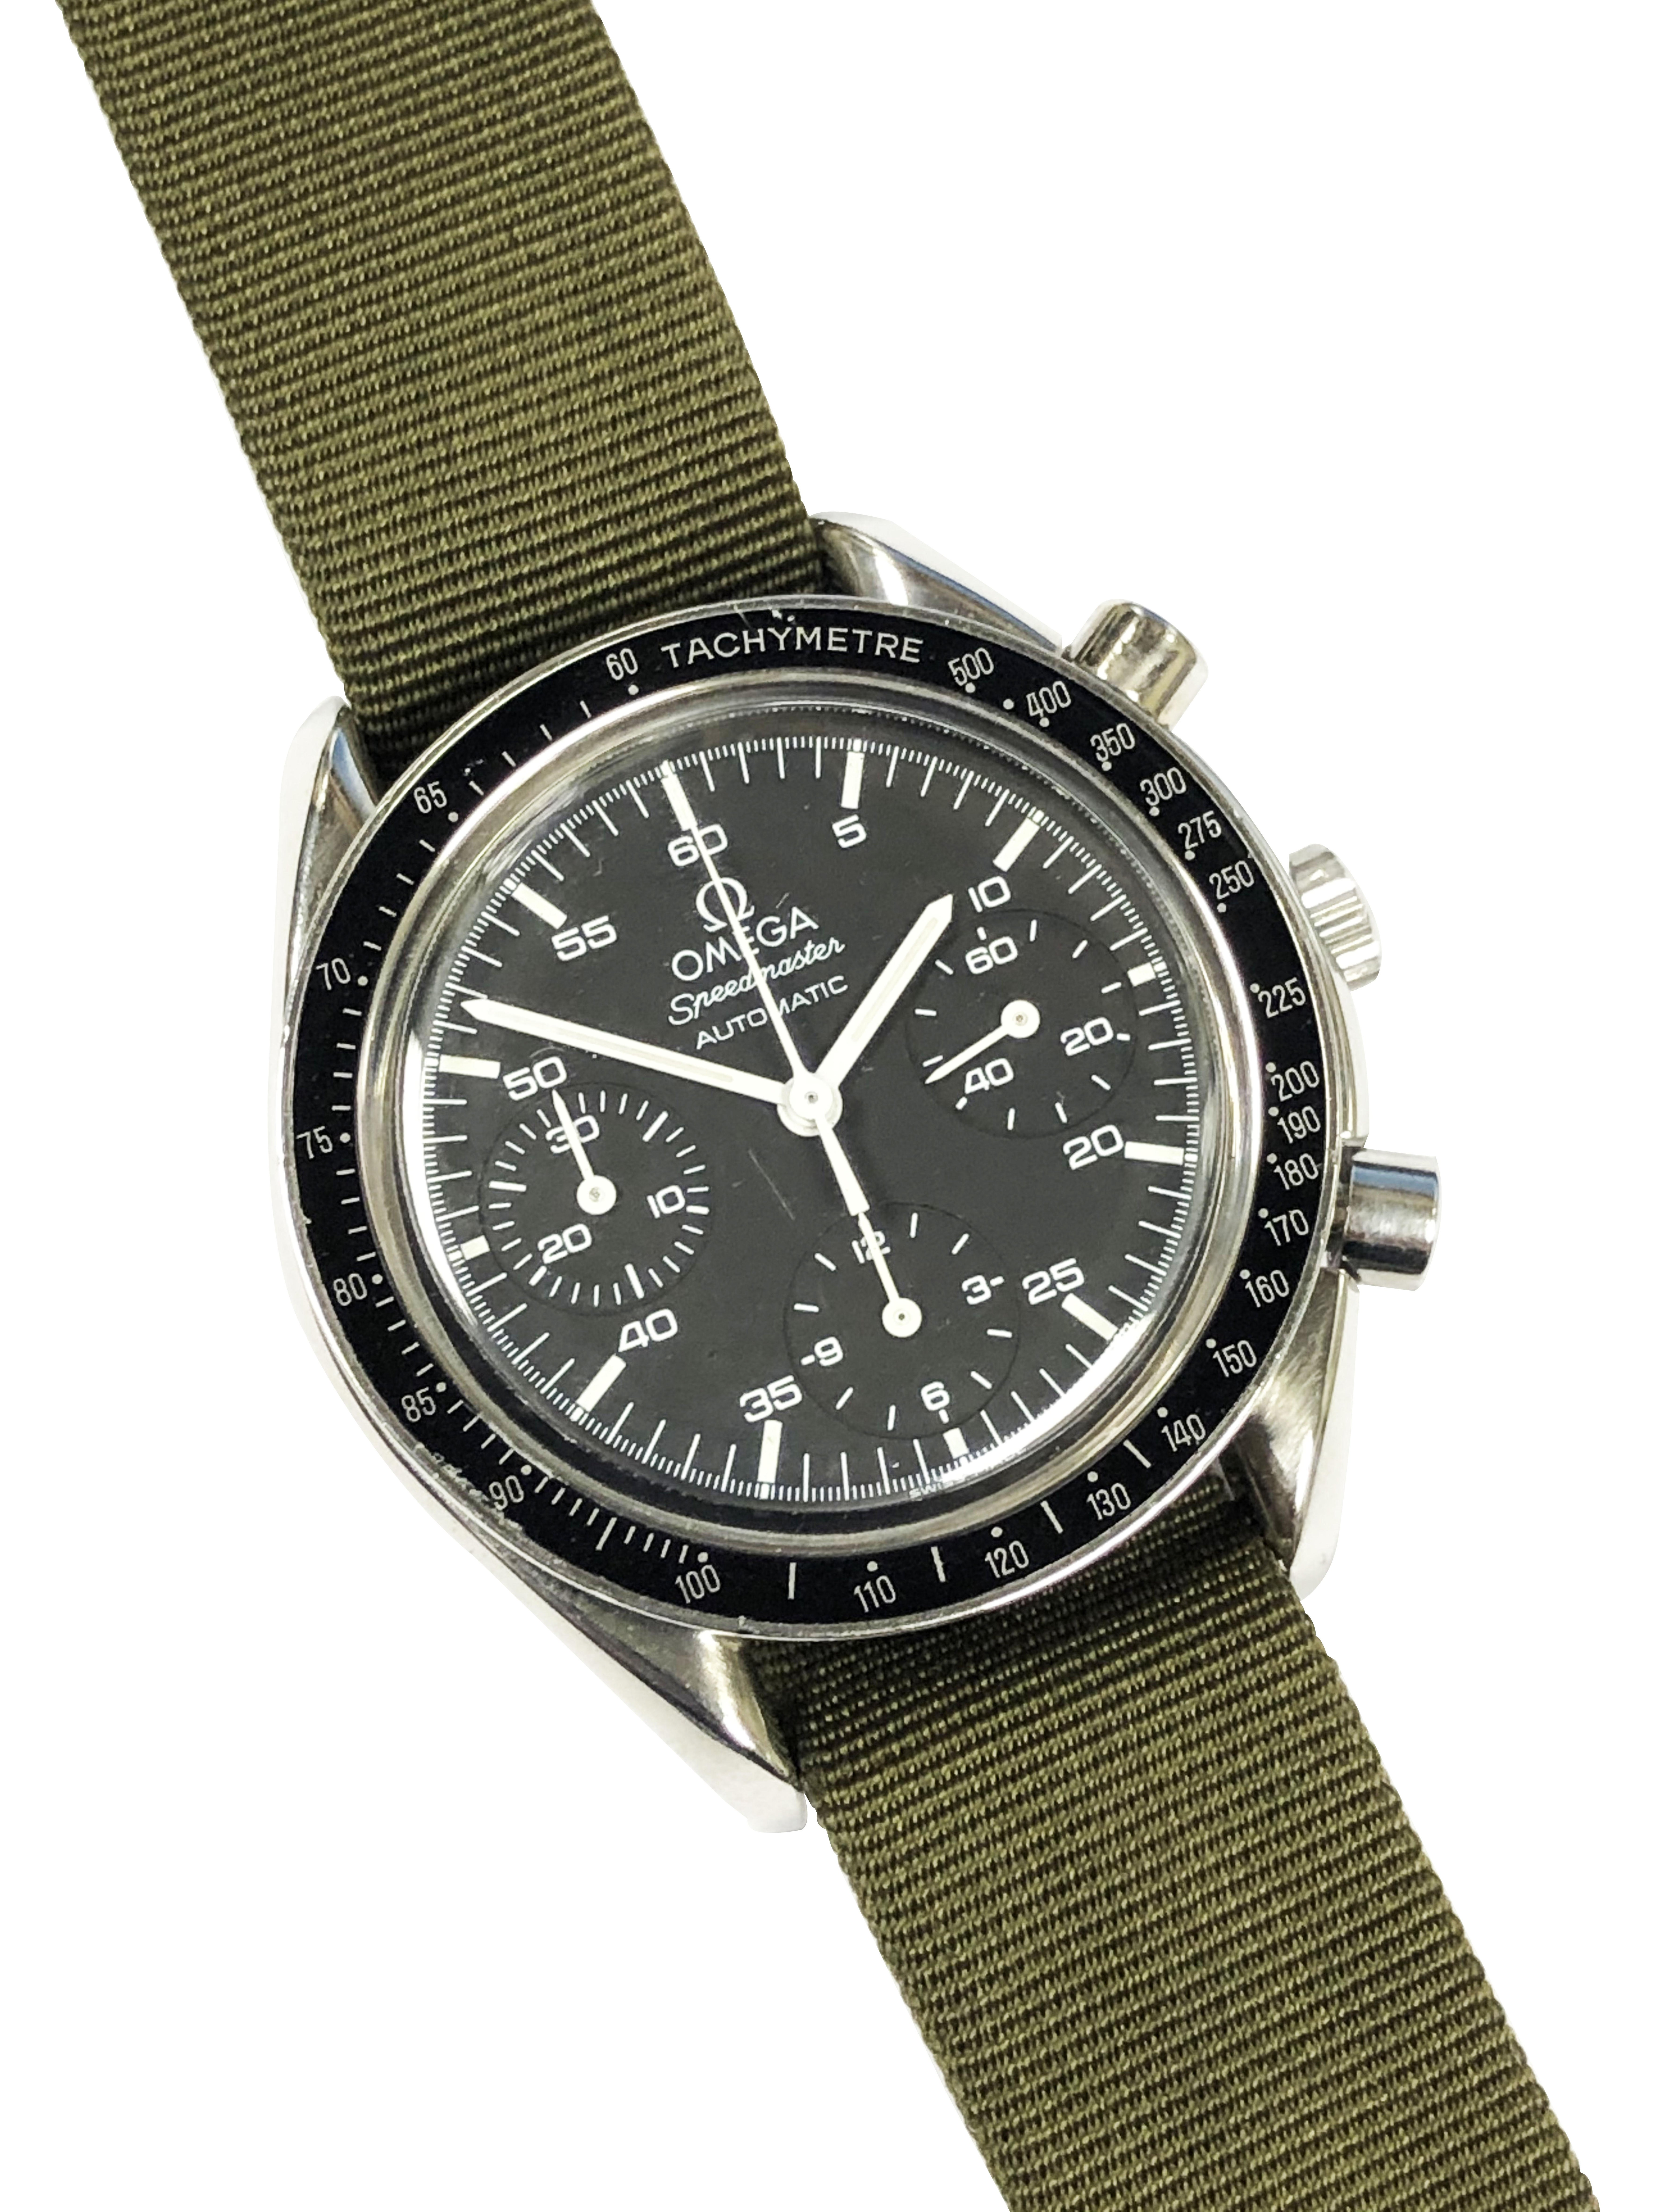 Circa mid 1990s Omega Speedmaster 175.0032.1 Chronograph, 39 M.M. Stainless Steel 2 Piece snap back case. Caliber 322 Automatic self winding 47 Jewel movement, 3 register Chronograph, timing functions with fly back center sweep hand. Black Enamel